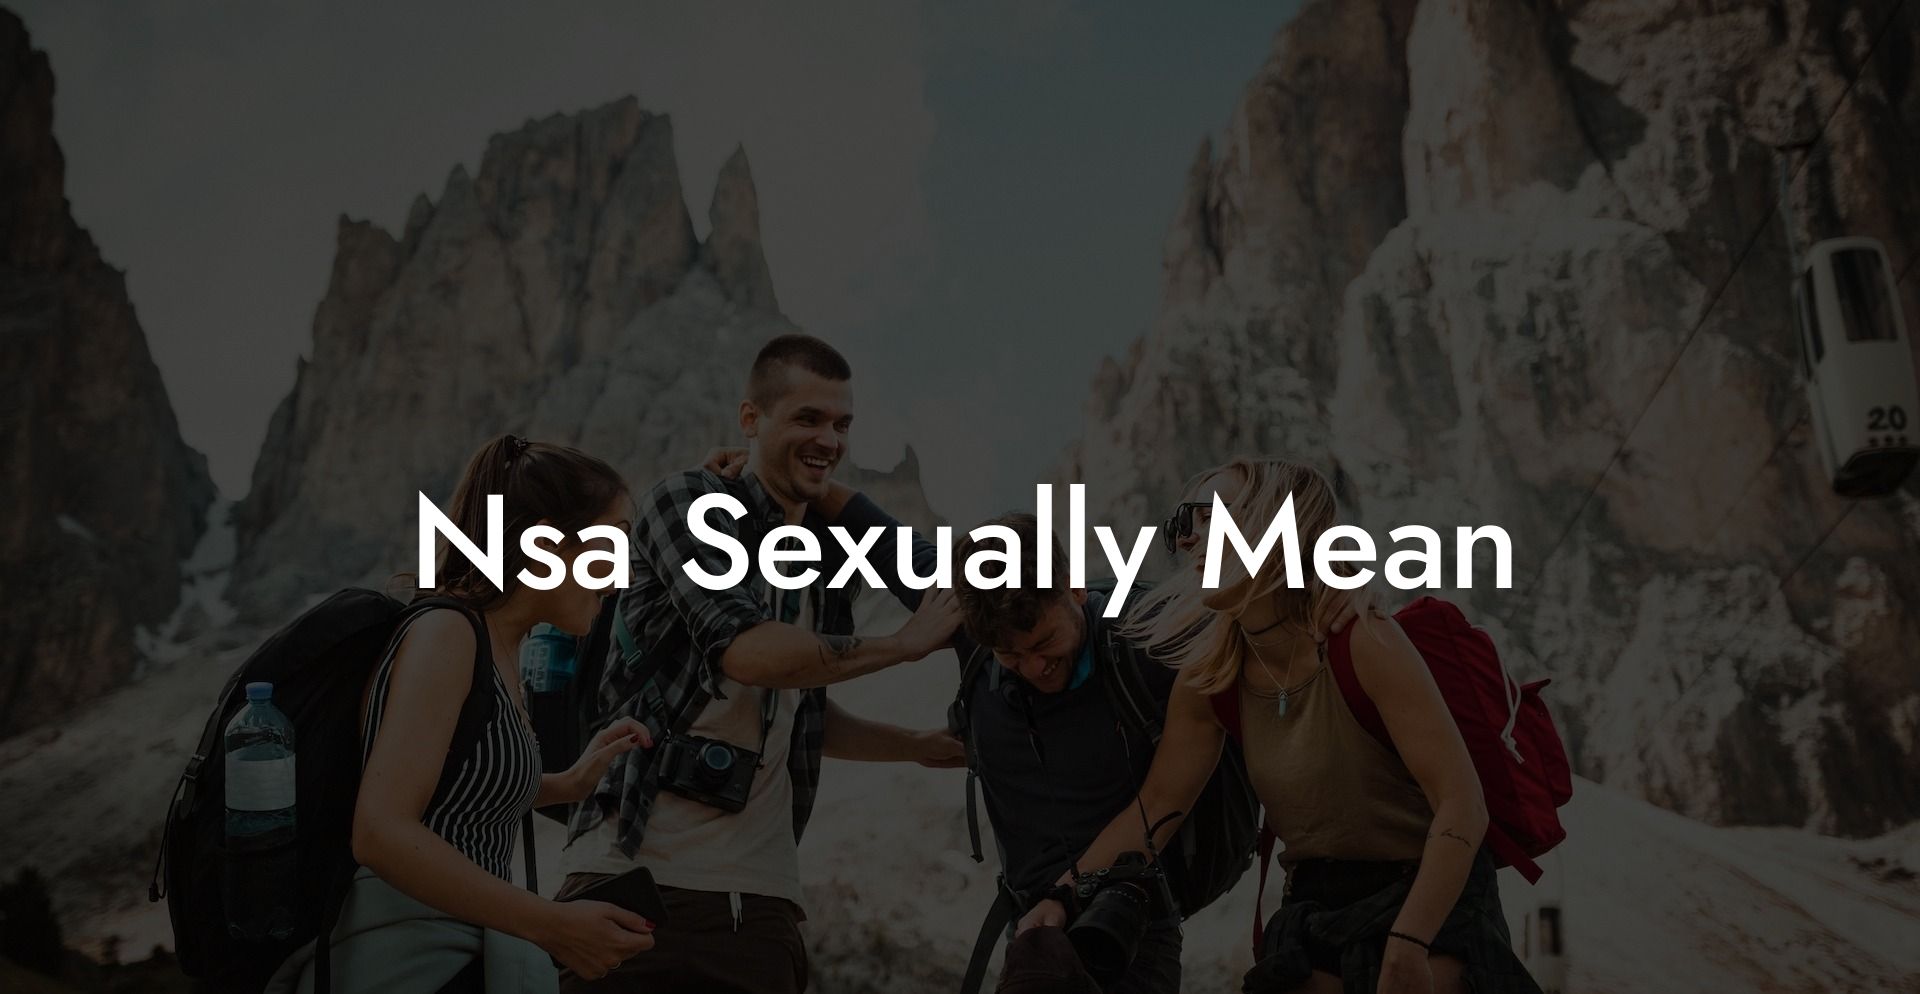 Nsa Sexually Mean